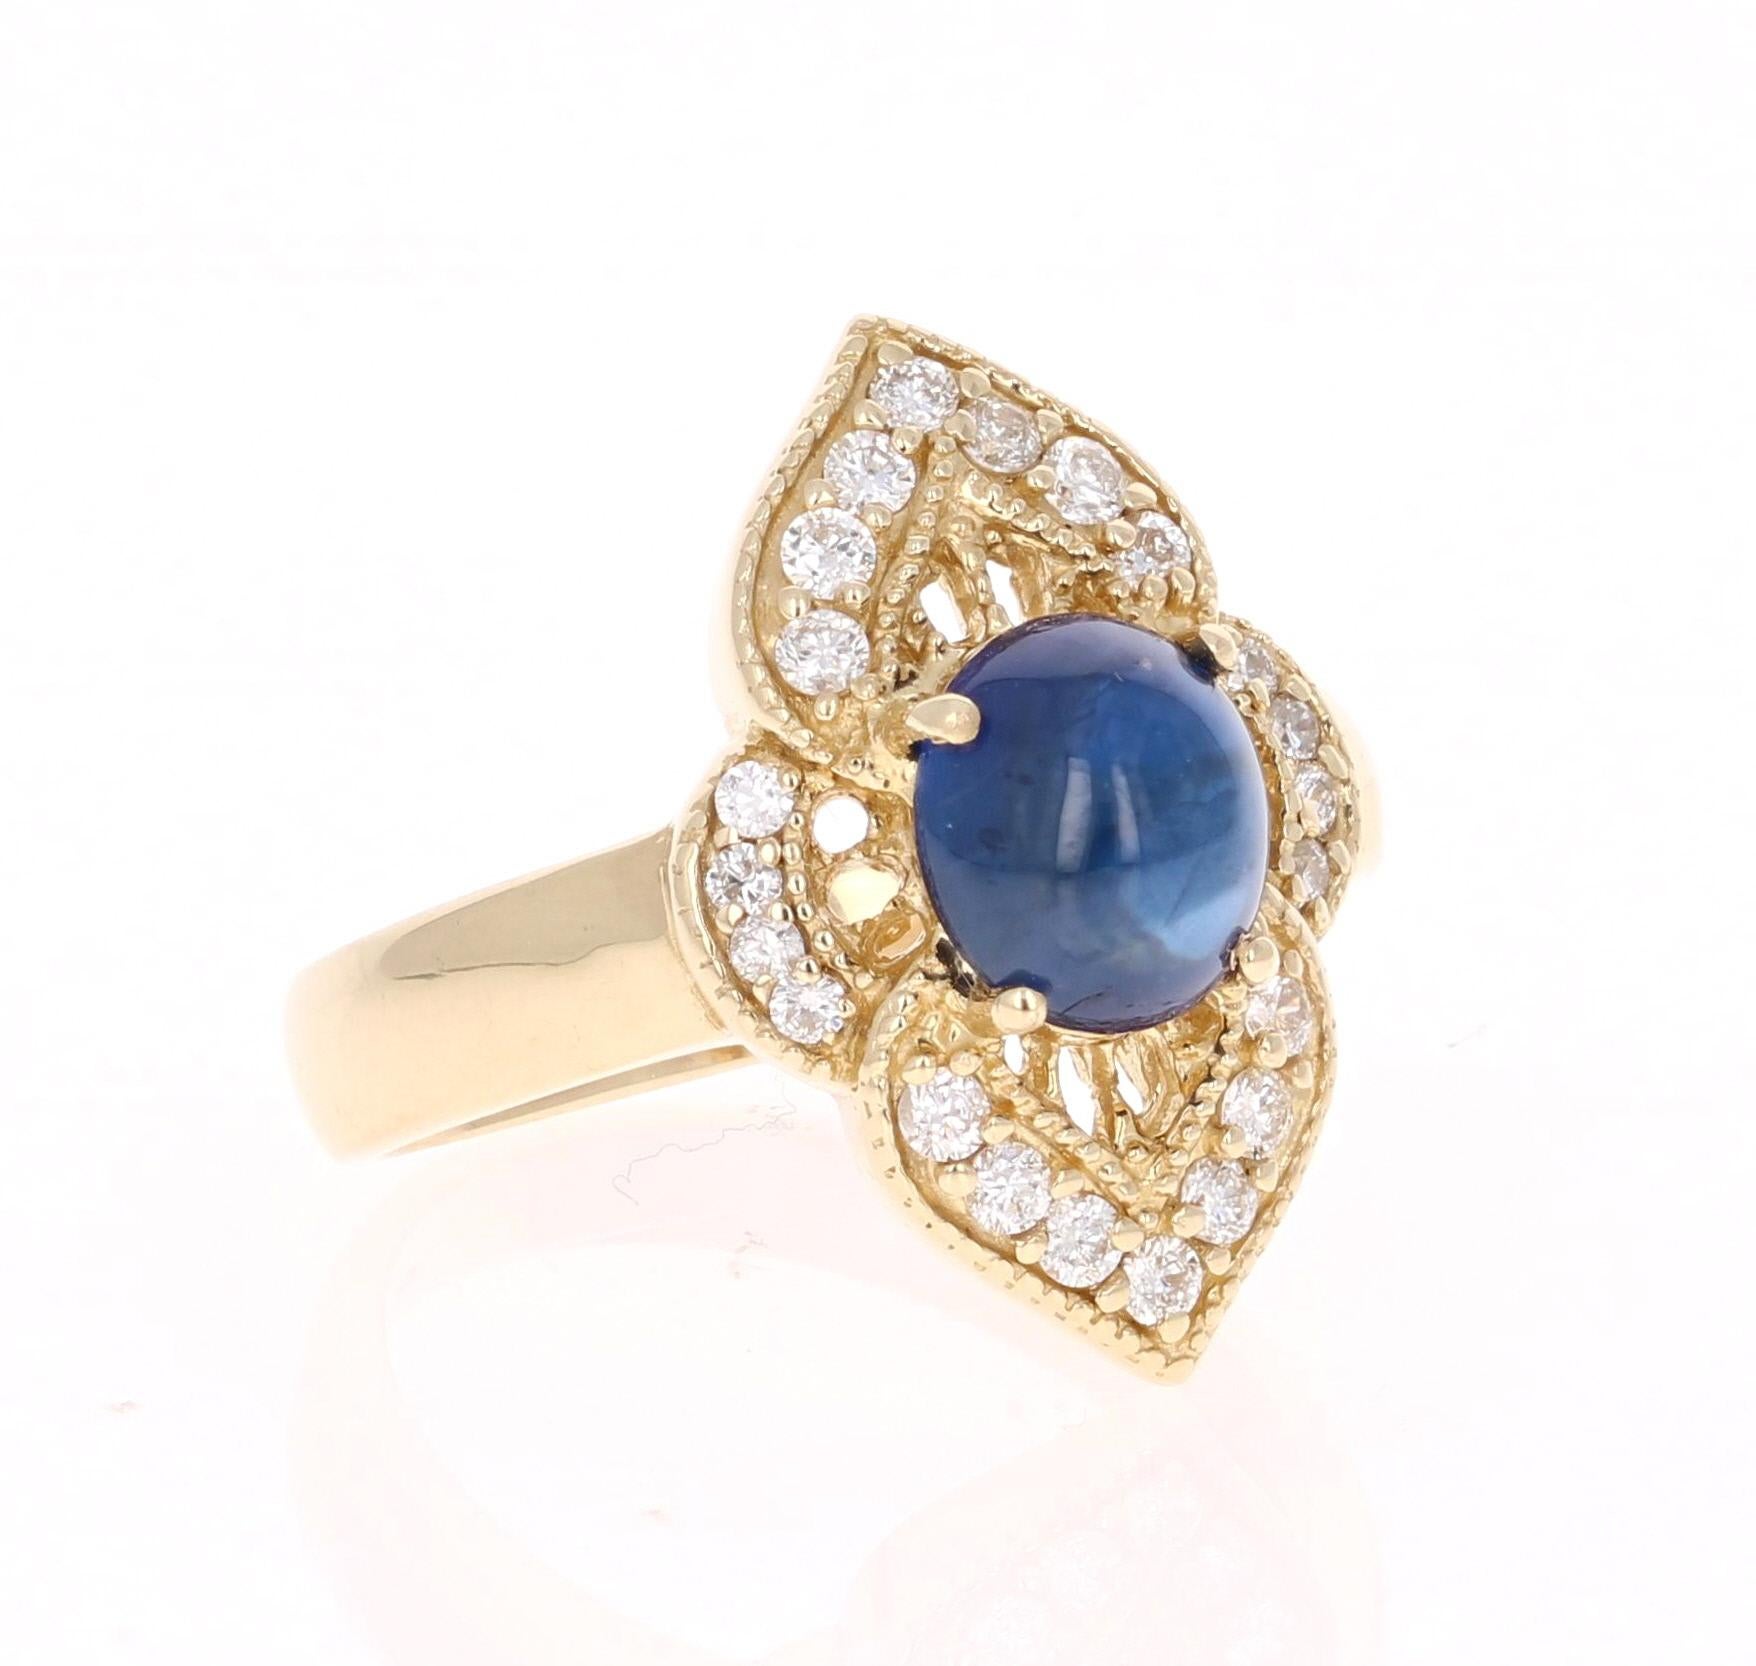 This unique ring is an art-deco inspired ring. It's beauty derives from the Cabochon Blue Sapphire that weighs 2.13 Carats and is surrounded by 22 Round Cut Diamonds weighing 0.33 Carats. The total carat weight is 2.46 Carats. It is set in 14K